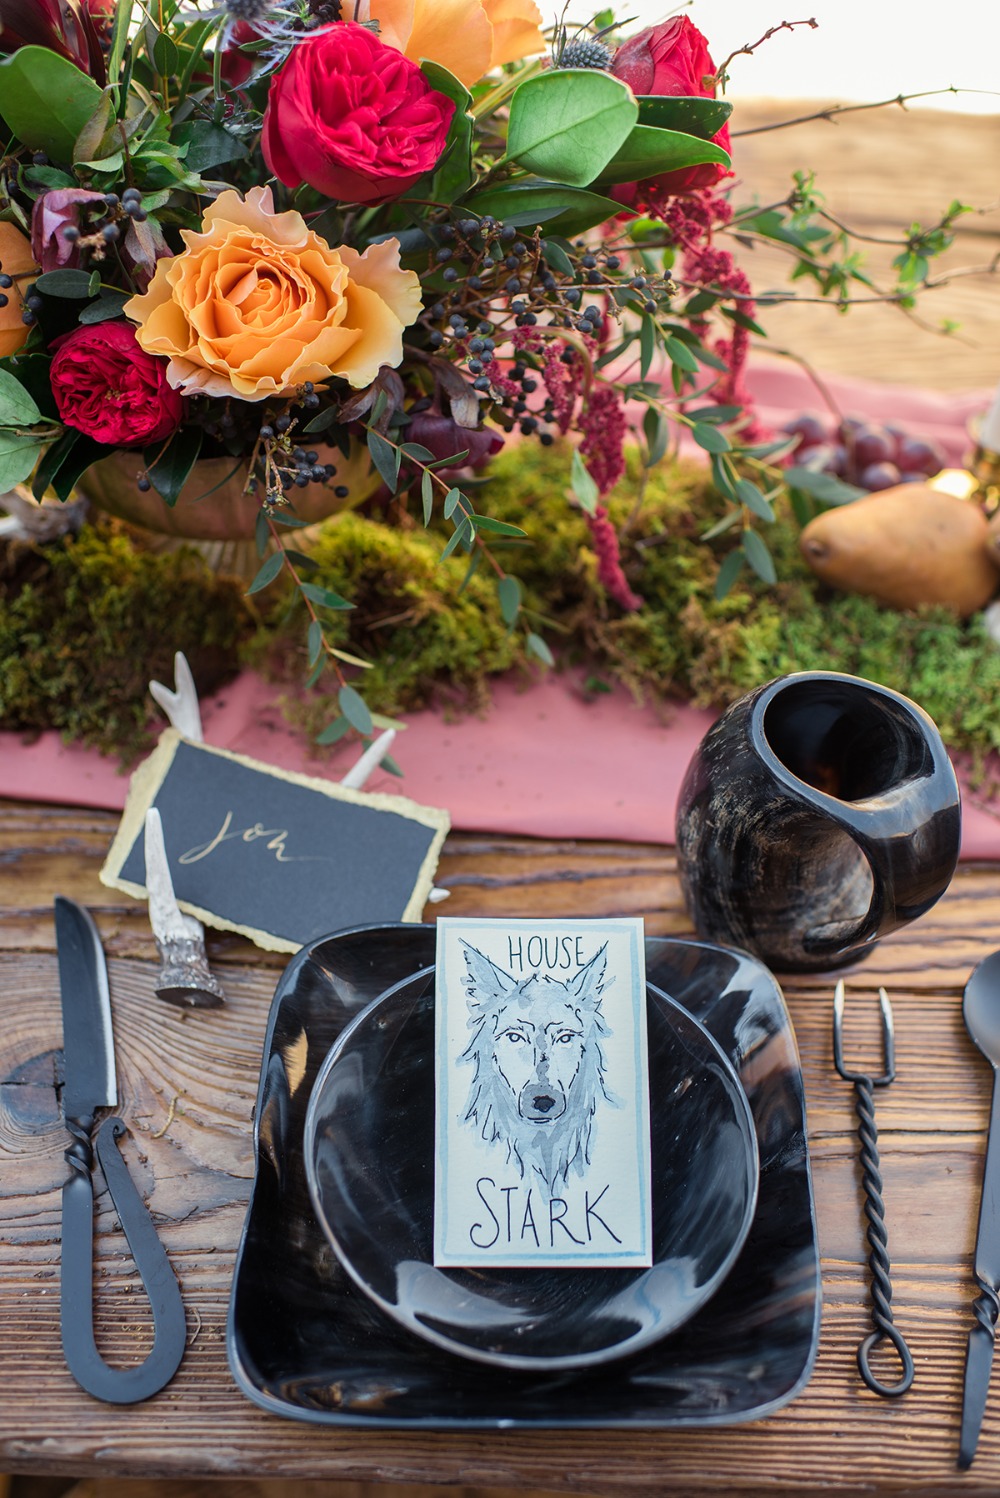 A unique and catchy wedding tablescape with black plates, unusual cutlery, a bright floral centerpiece and a moss runner